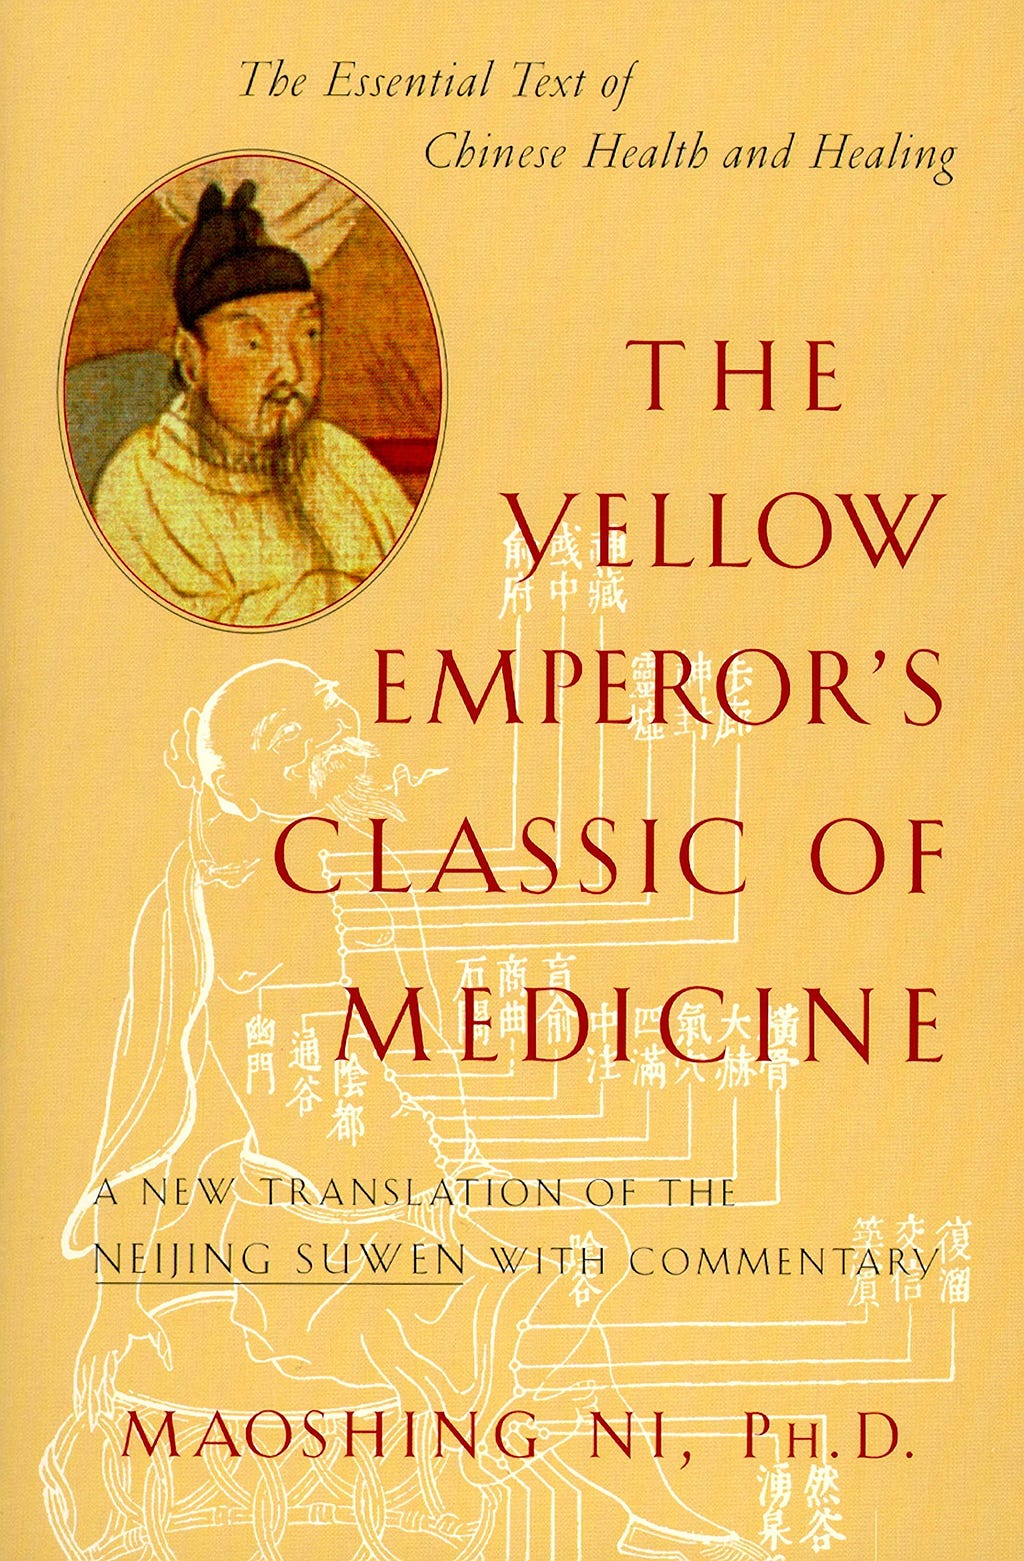 The Yellow Emperor's Classic of Medicine: A New Translation of the Neijing Suwen with Commentary E book